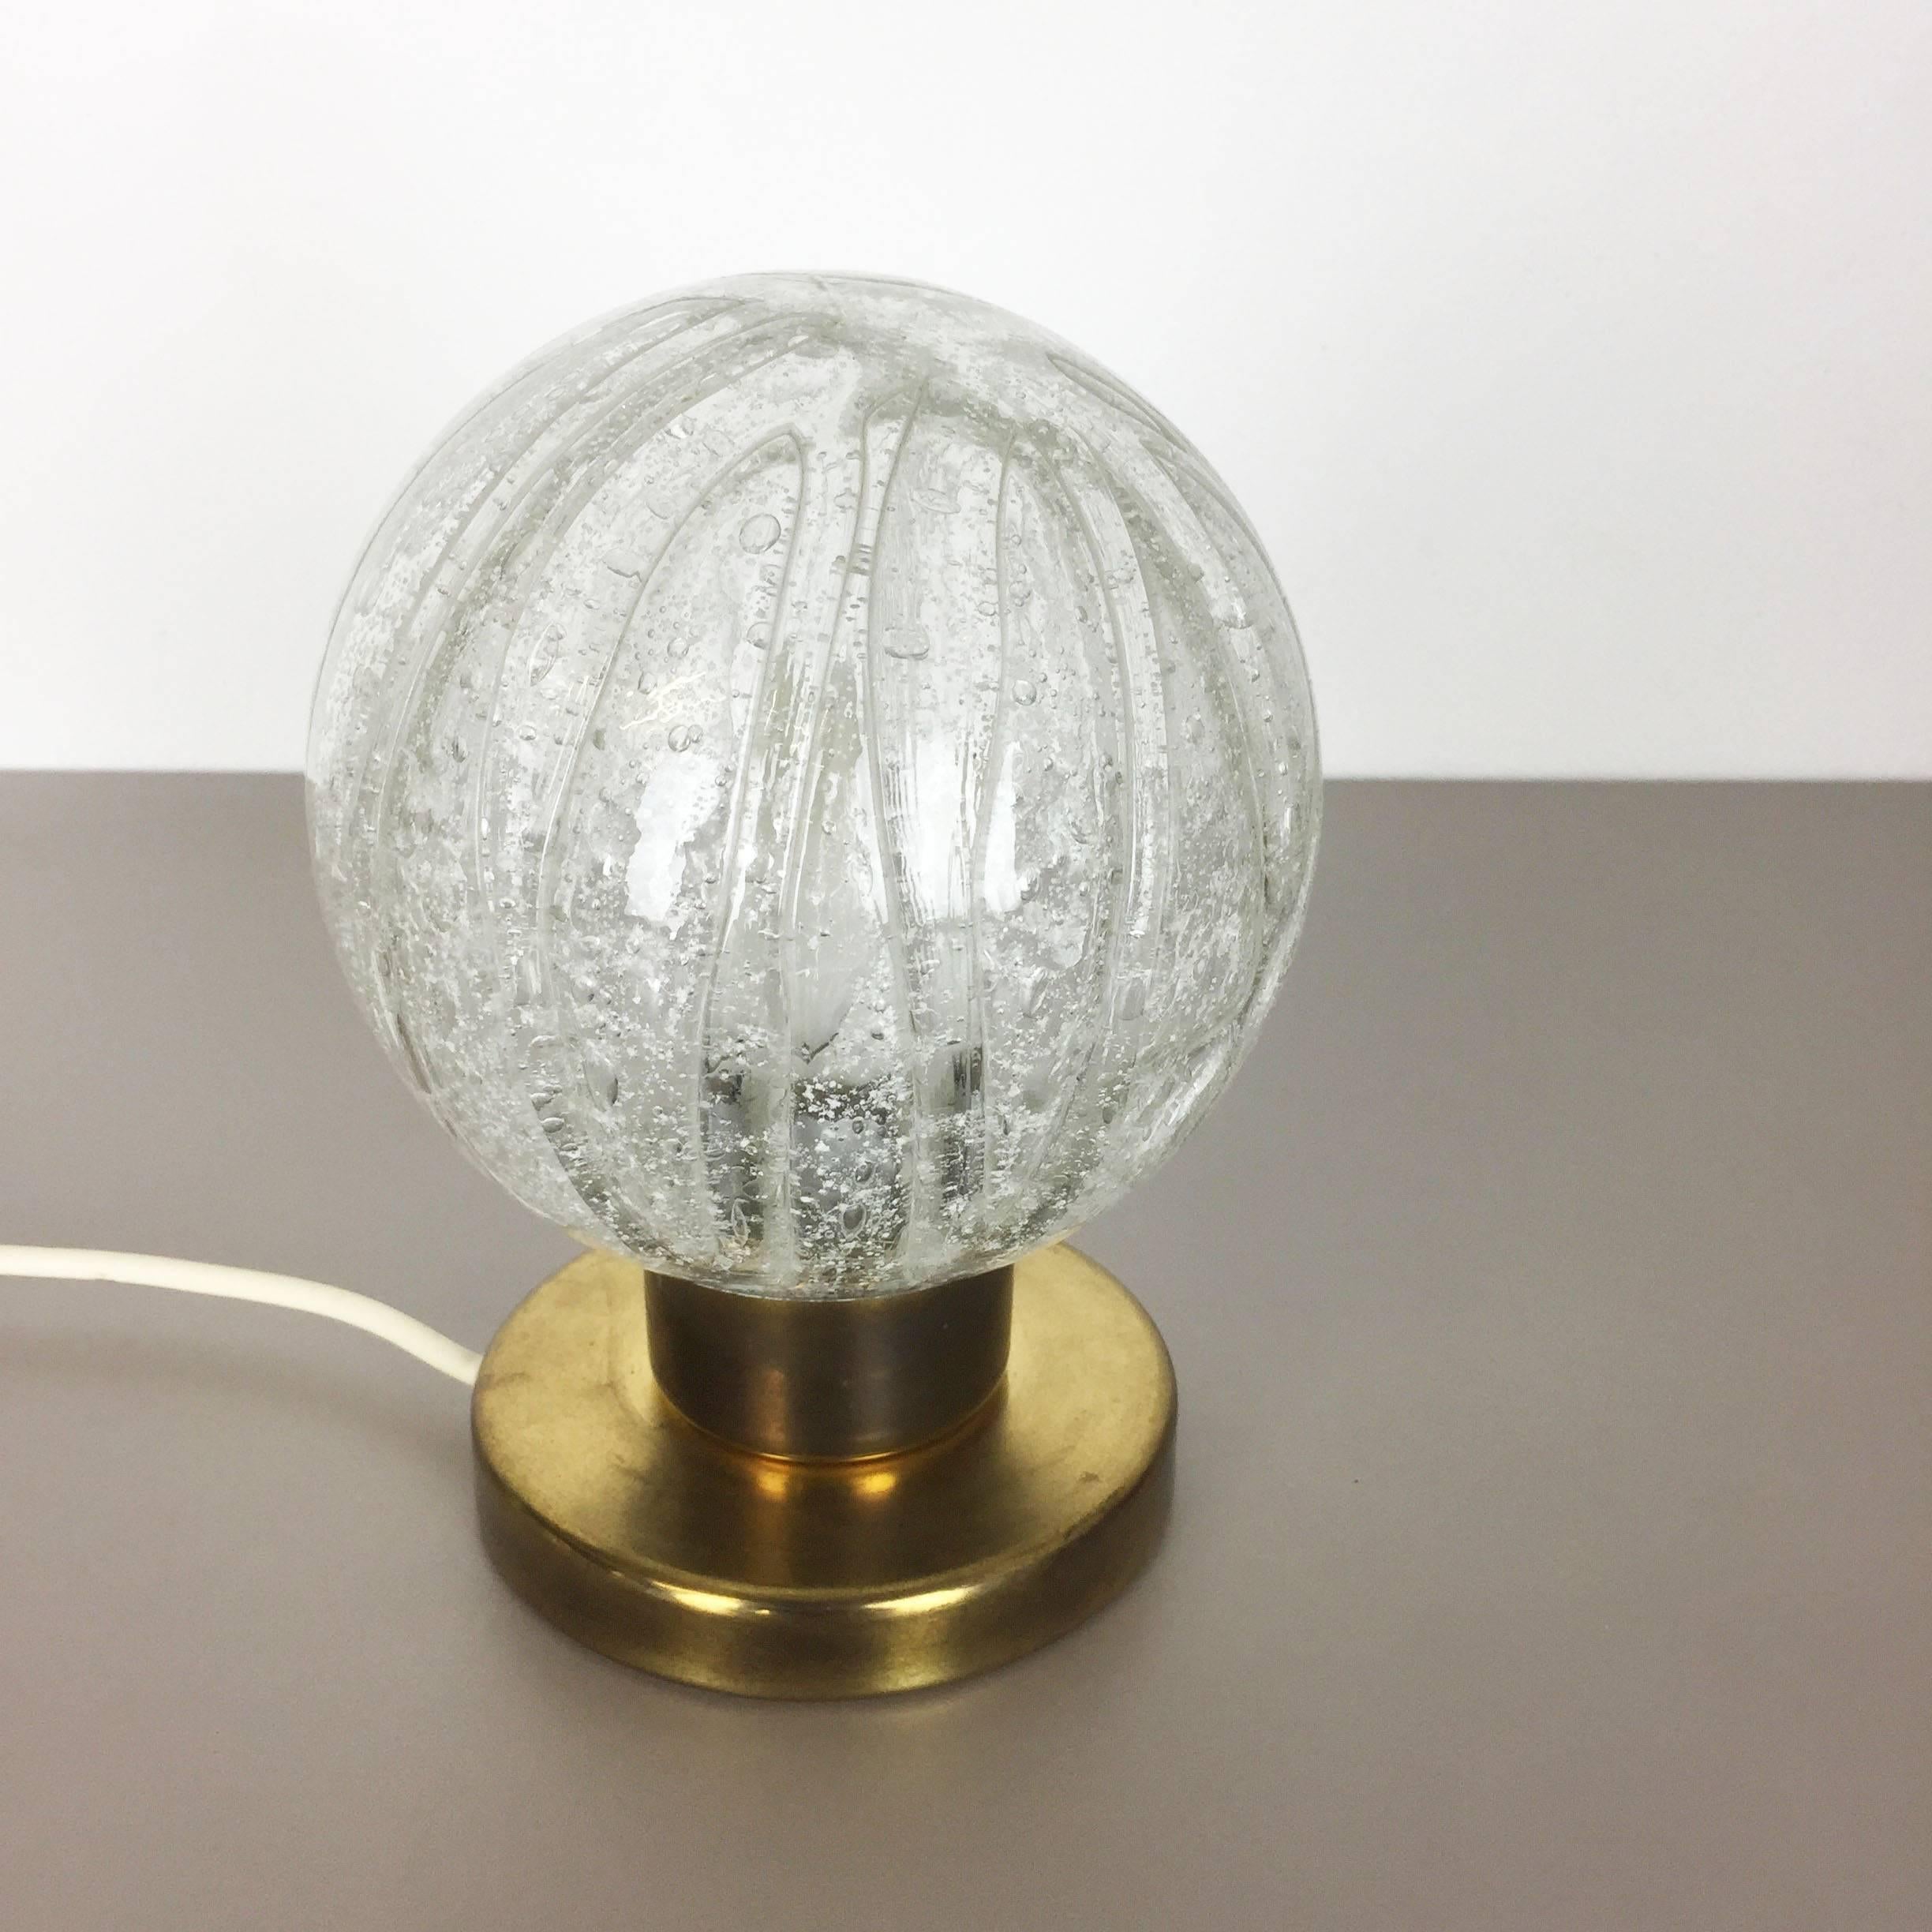 Mid-Century Modern Modernist Glass and Brass Table Light by Doria Lights, 1960s, Germany Nr. 1